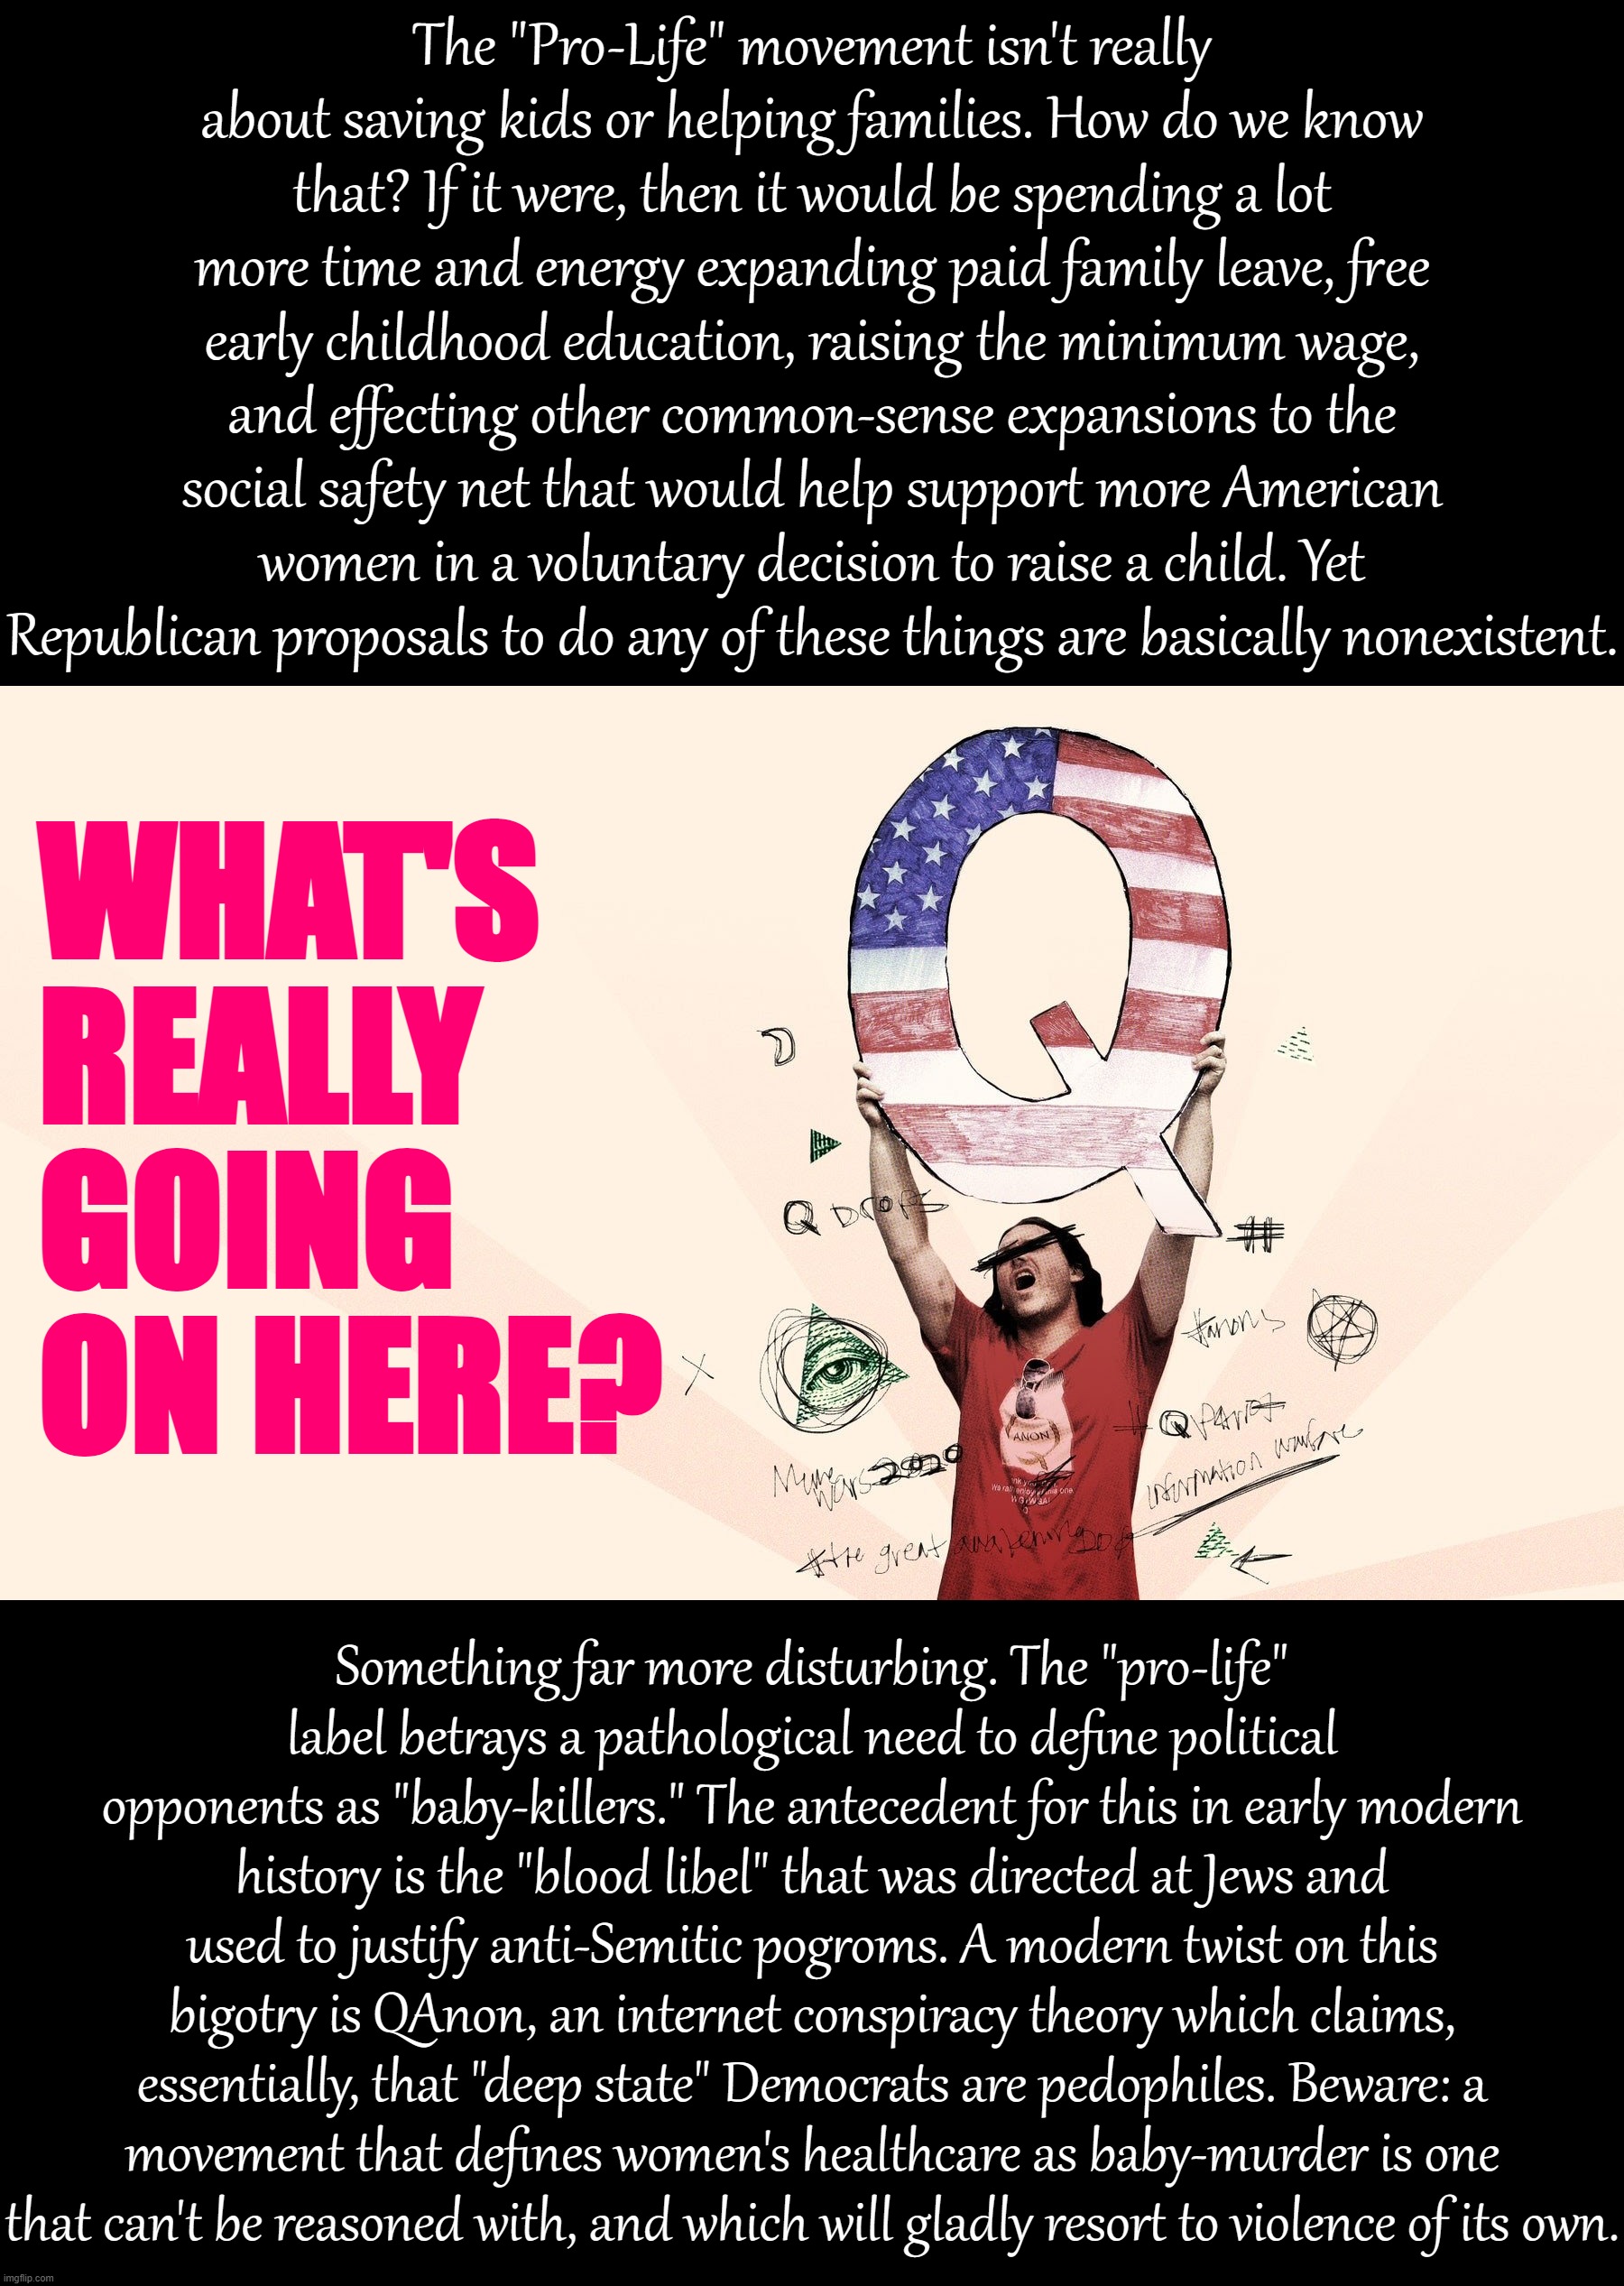 The "pro-life" movement is less obviously insane than QAnon, but it ends in the same place: Our political opponents kill babies. | The "Pro-Life" movement isn't really about saving kids or helping families. How do we know that? If it were, then it would be spending a lot more time and energy expanding paid family leave, free early childhood education, raising the minimum wage, and effecting other common-sense expansions to the social safety net that would help support more American women in a voluntary decision to raise a child. Yet Republican proposals to do any of these things are basically nonexistent. WHAT'S REALLY GOING ON HERE? Something far more disturbing. The "pro-life" label betrays a pathological need to define political opponents as "baby-killers." The antecedent for this in early modern history is the "blood libel" that was directed at Jews and used to justify anti-Semitic pogroms. A modern twist on this bigotry is QAnon, an internet conspiracy theory which claims, essentially, that "deep state" Democrats are pedophiles. Beware: a movement that defines women's healthcare as baby-murder is one that can't be reasoned with, and which will gladly resort to violence of its own. | image tagged in pro-life,qanon,conservative logic,conspiracy theory,abortion,blood libel | made w/ Imgflip meme maker